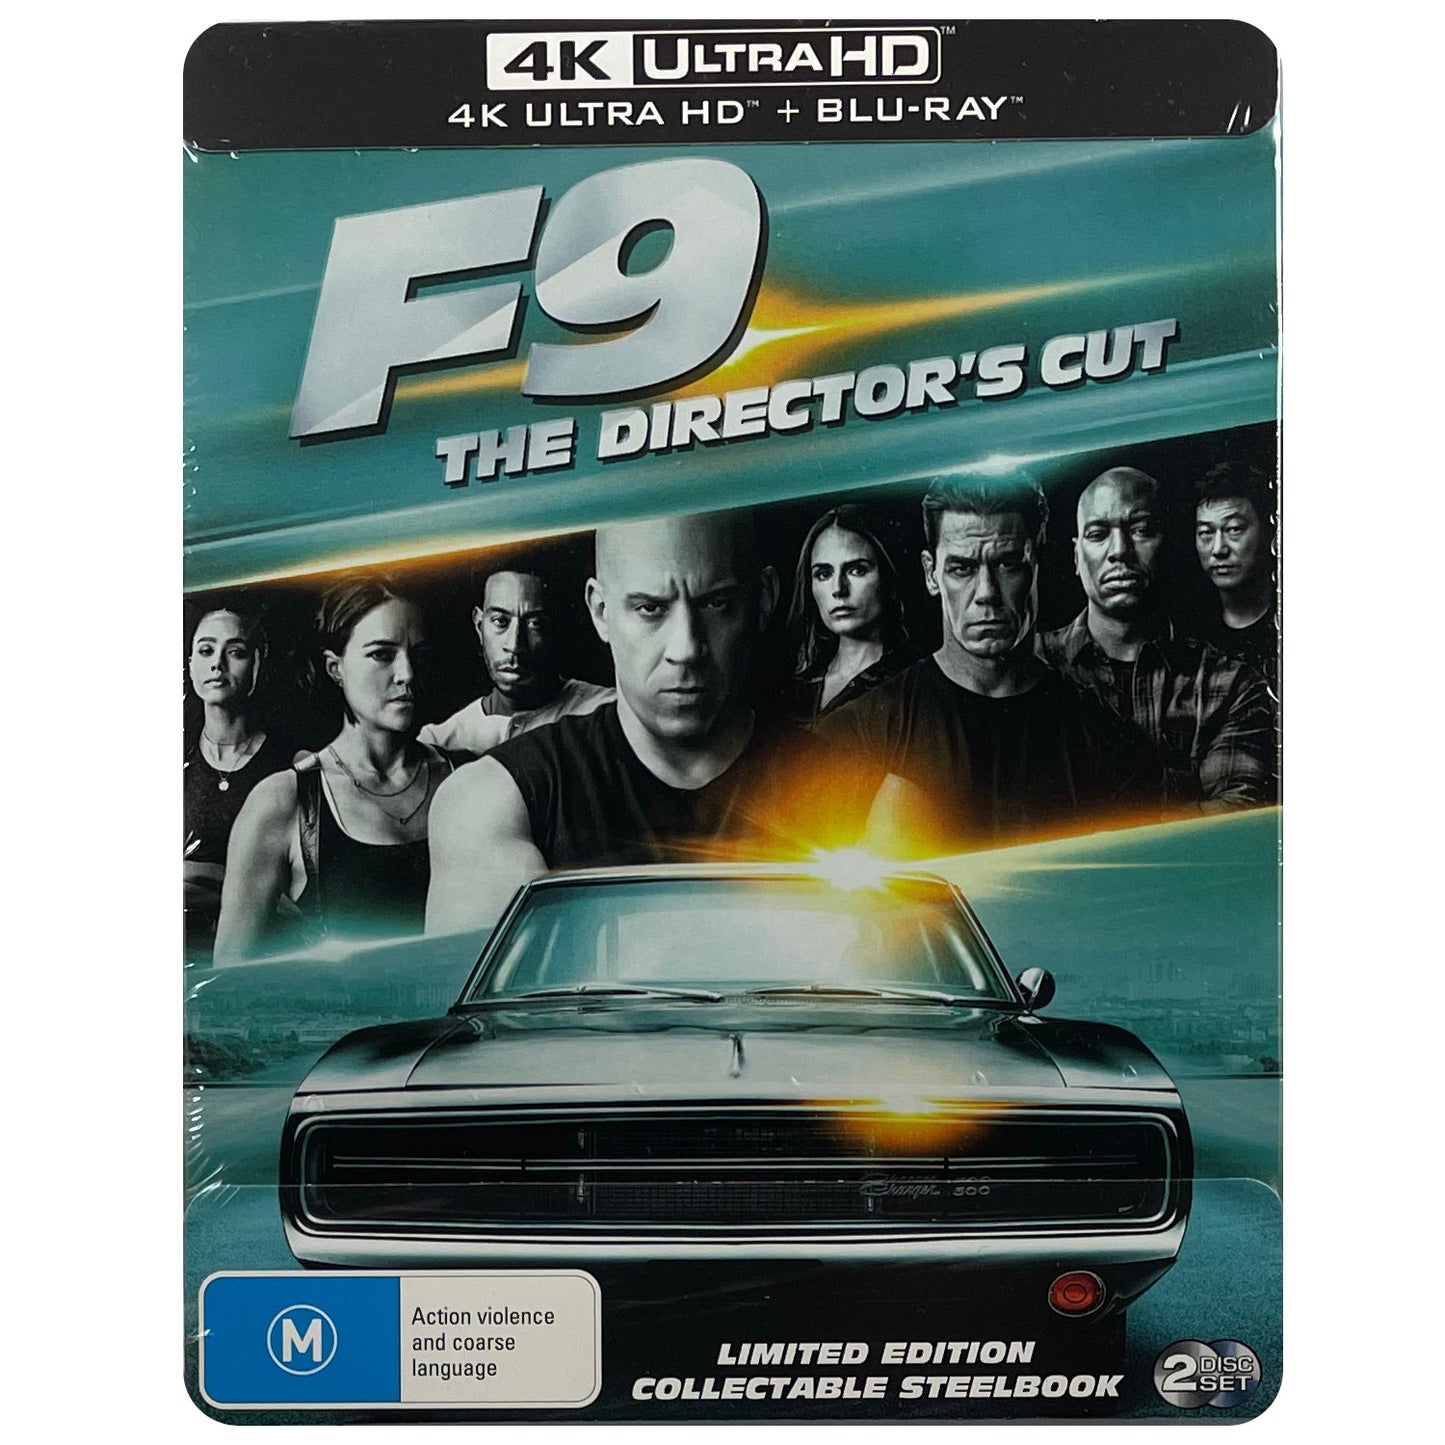 Fast and Furious 9: F9 (The Director's Cut) 4K Steelbook